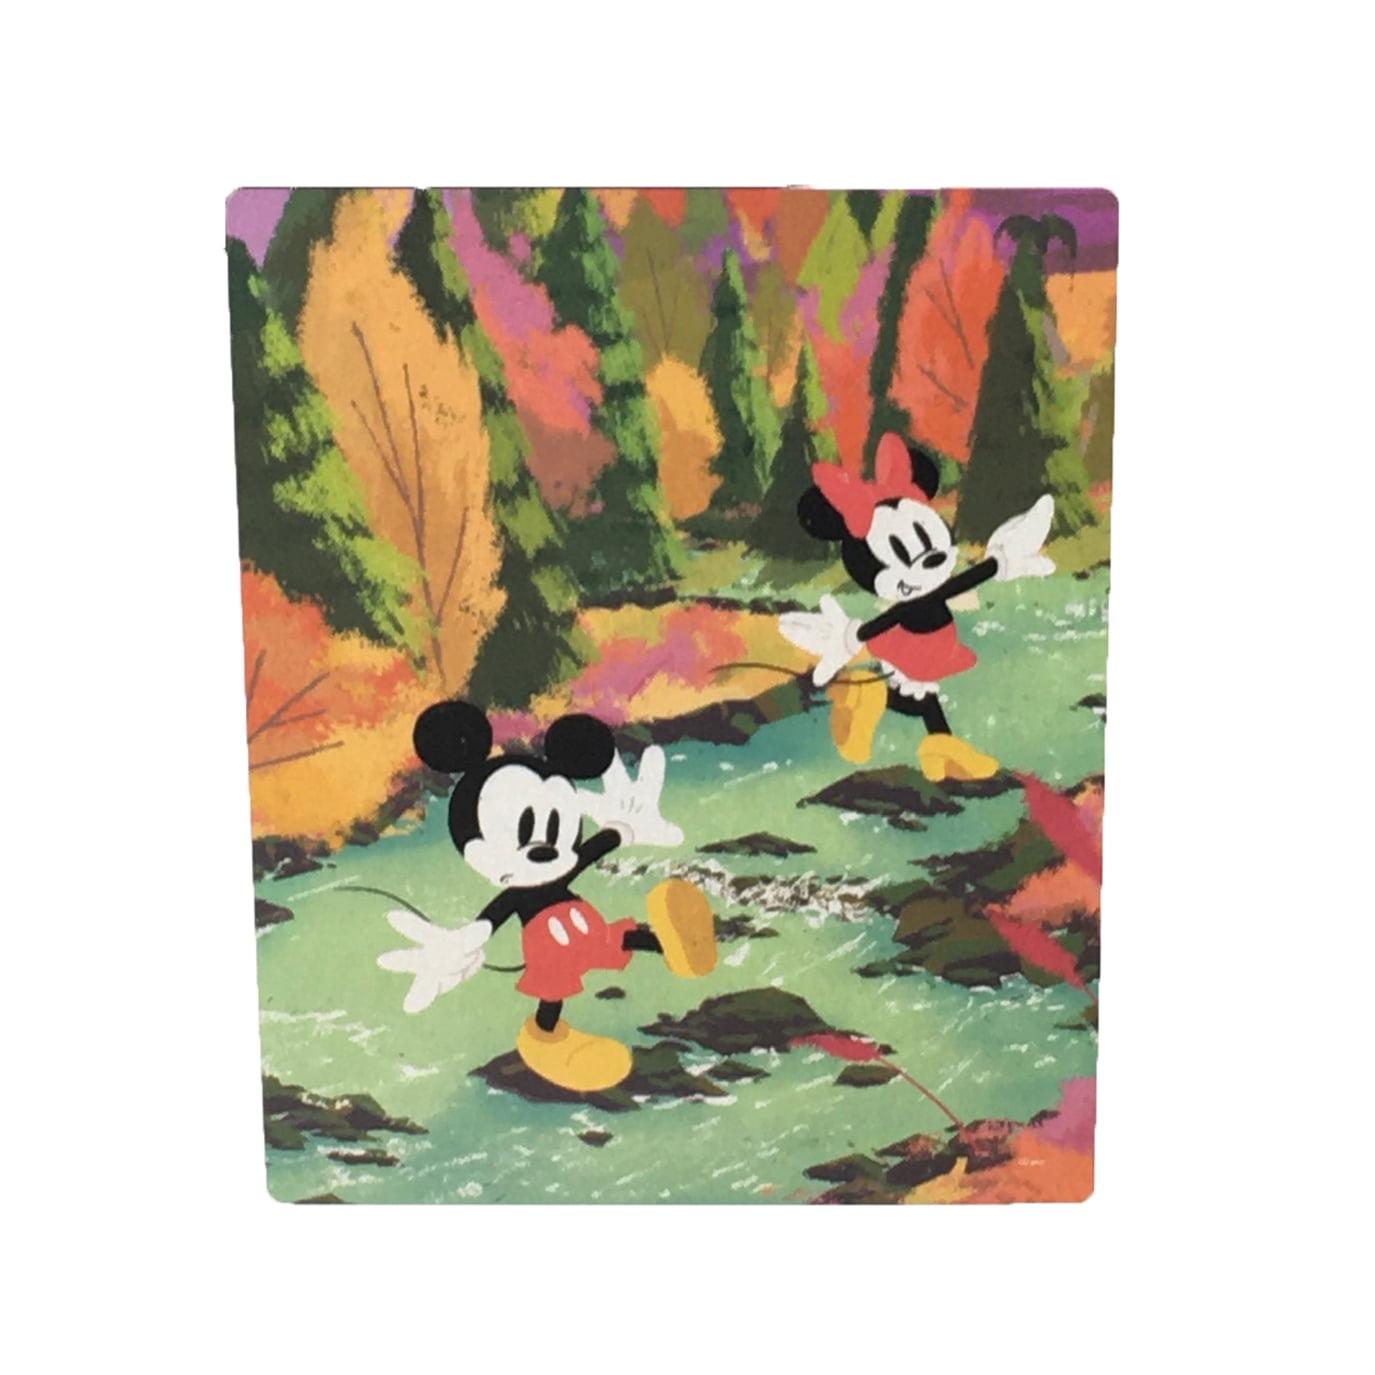 Cardinal Disney Mickey and Minnie Mouse 500 PC Puzzle 9 for sale online